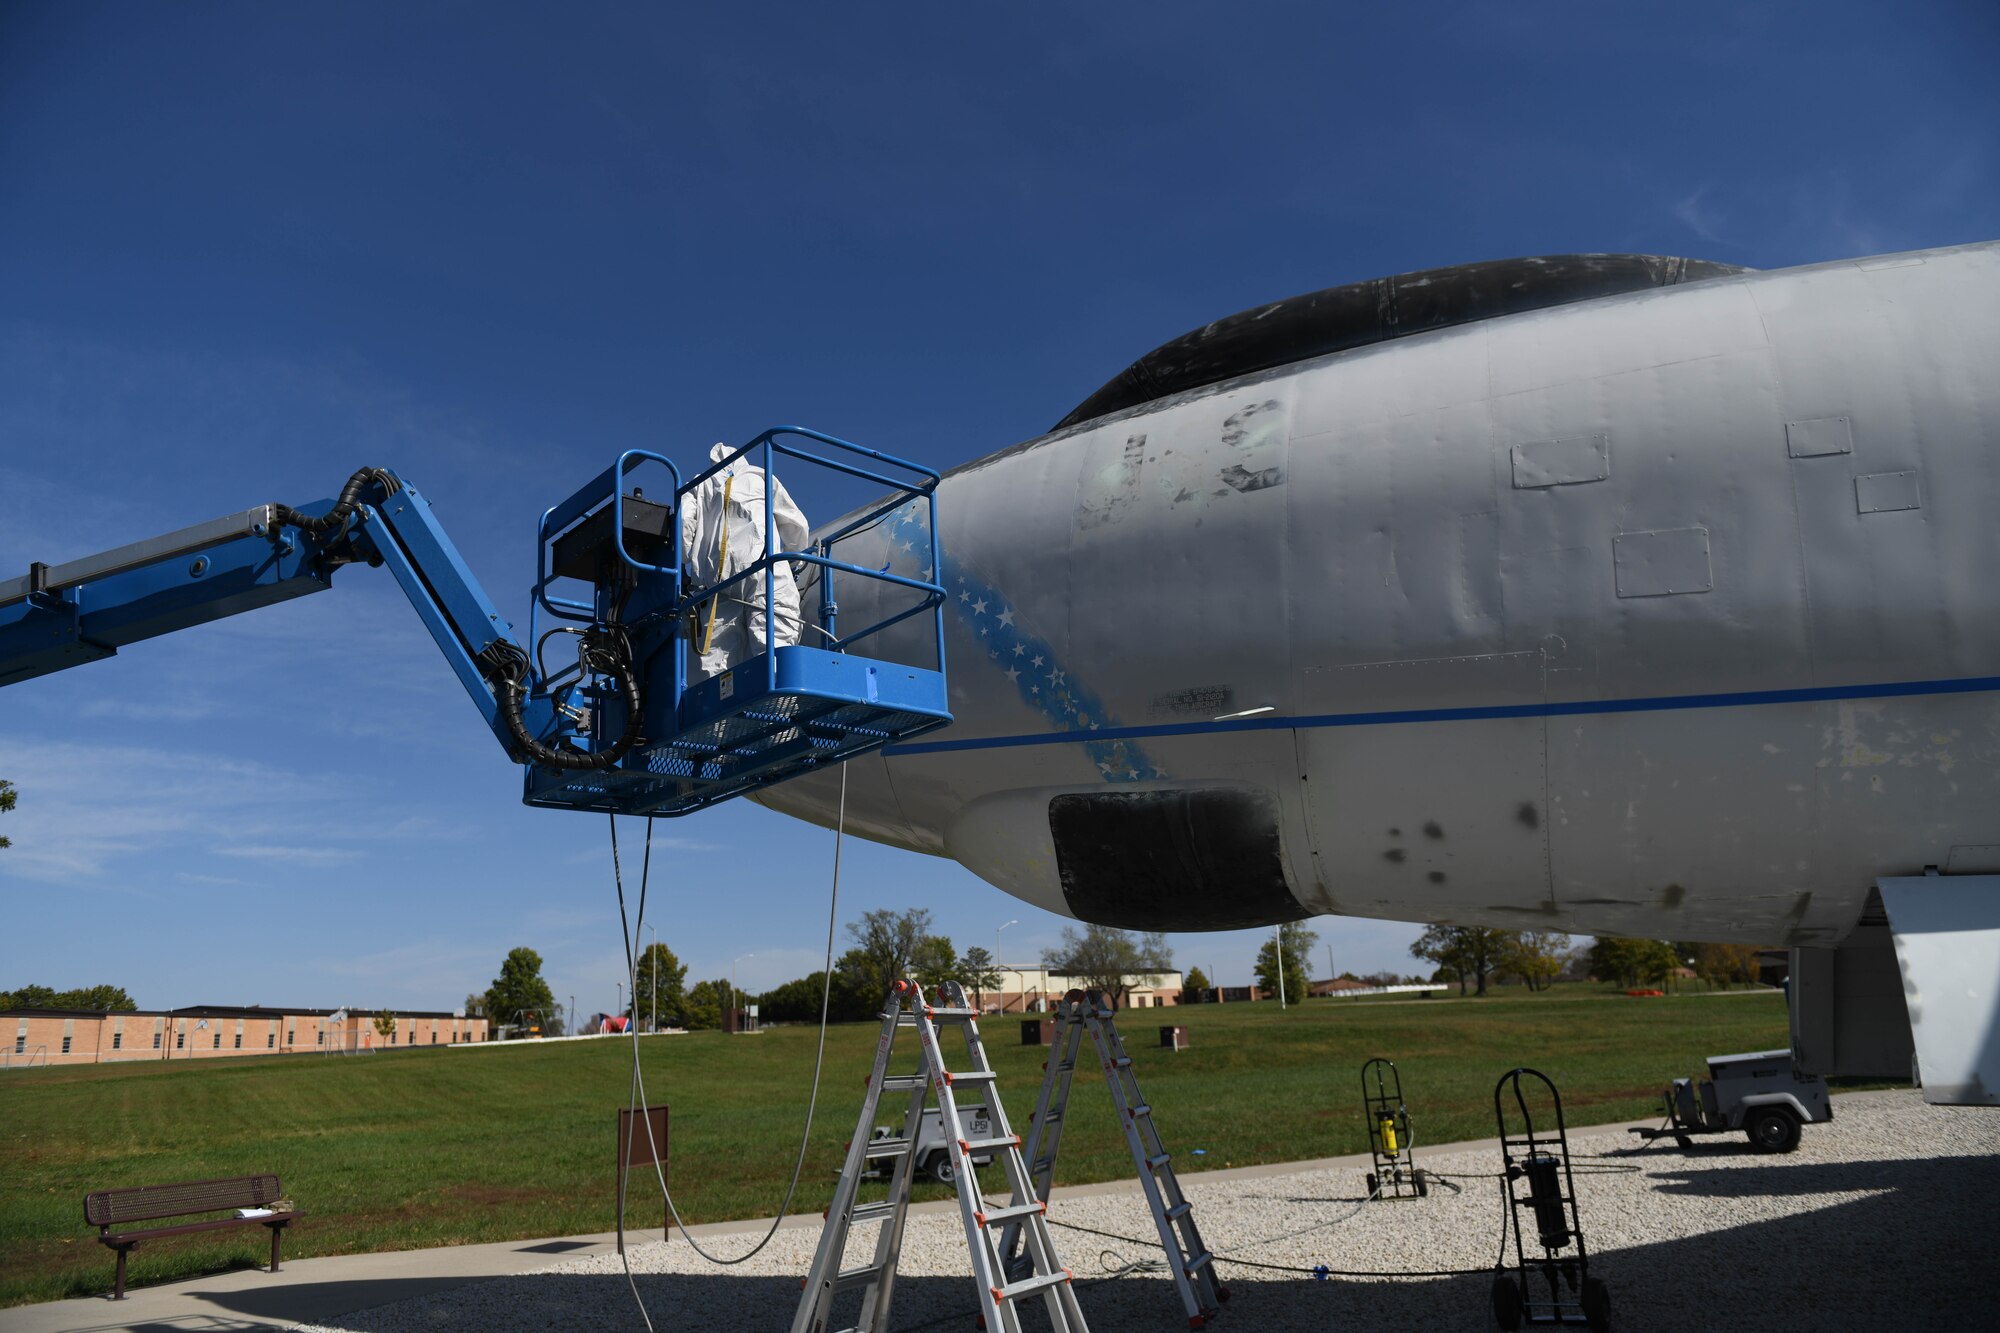 U.S. Air Force Tech. Sgt. Donald Curran, 509th Maintenance Squadron low-observable maintenance technician, uses a lift to check the front of the Boeing B-47 Stratojet static display at Whiteman Air Forces Base, Missouri on Oct. 14, 2020. Mobile lifts were required to reach many areas of the aircraft during its renovation. (U.S. Air Force photograph by Airman 1st Class Devan Halstead)